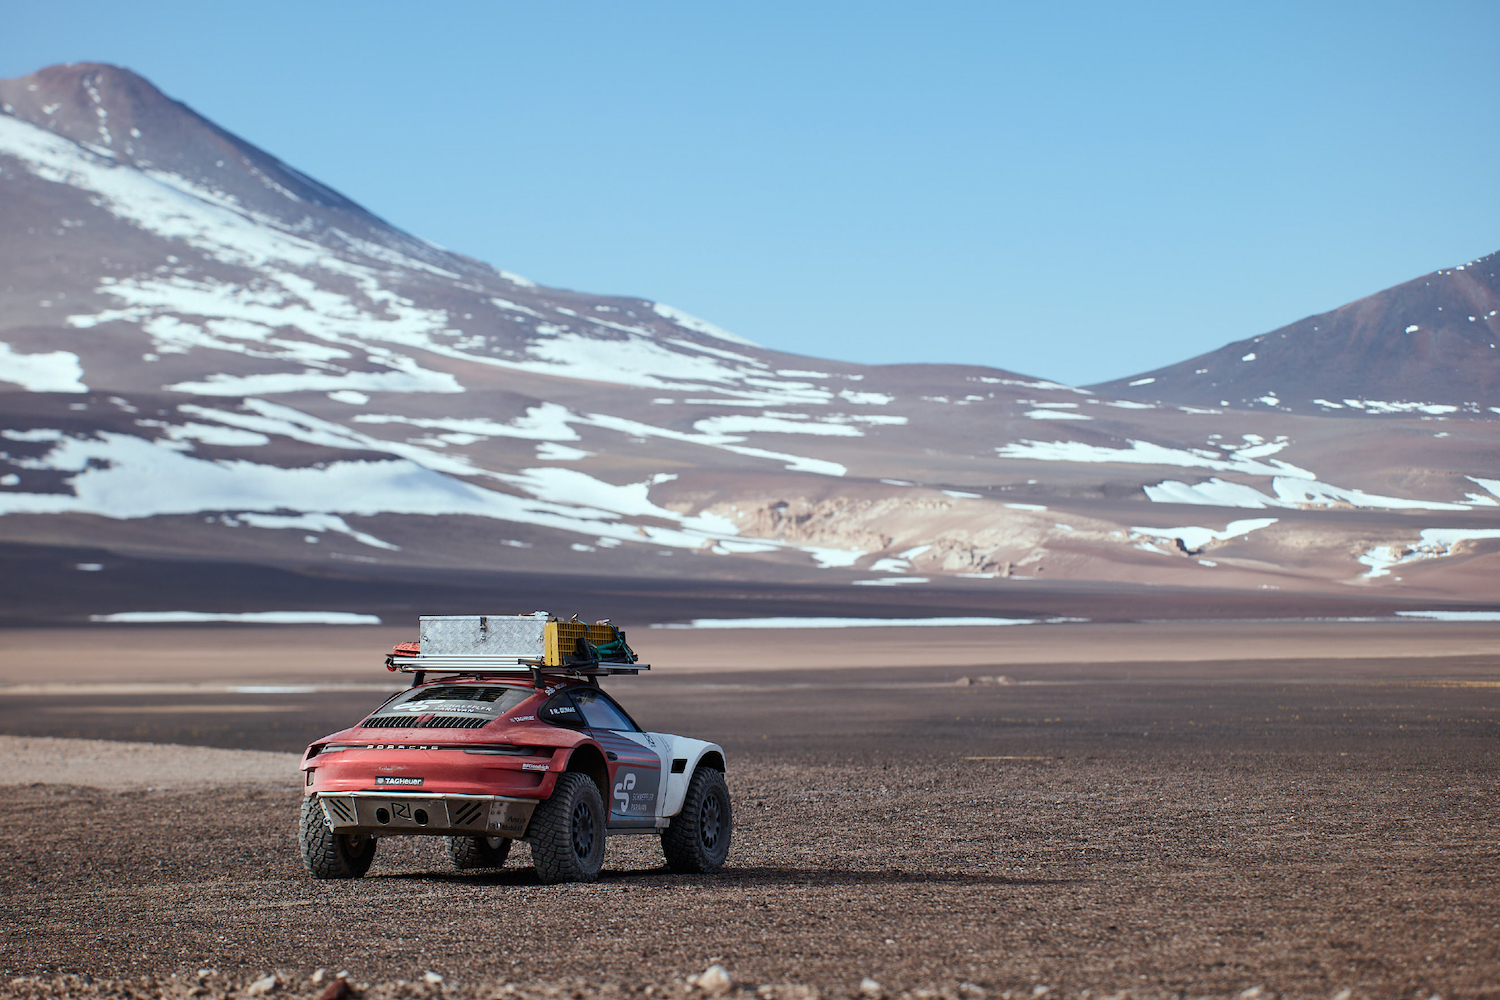 Rear end of Porsche 911 Dakar Prototype driving on rocky terrain with snow on mountains in the back.